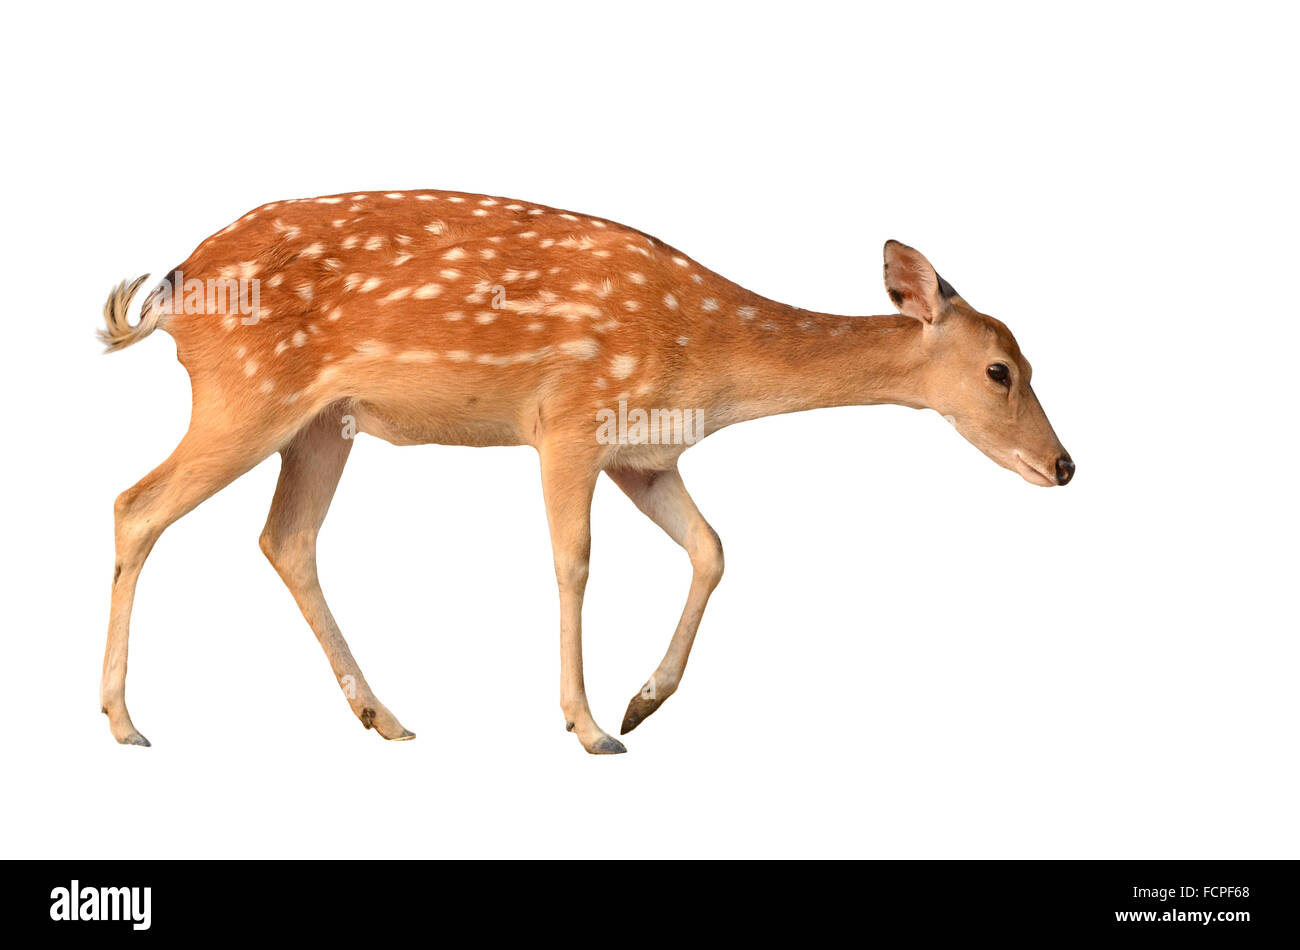 sika deer isolated on white background Stock Photo